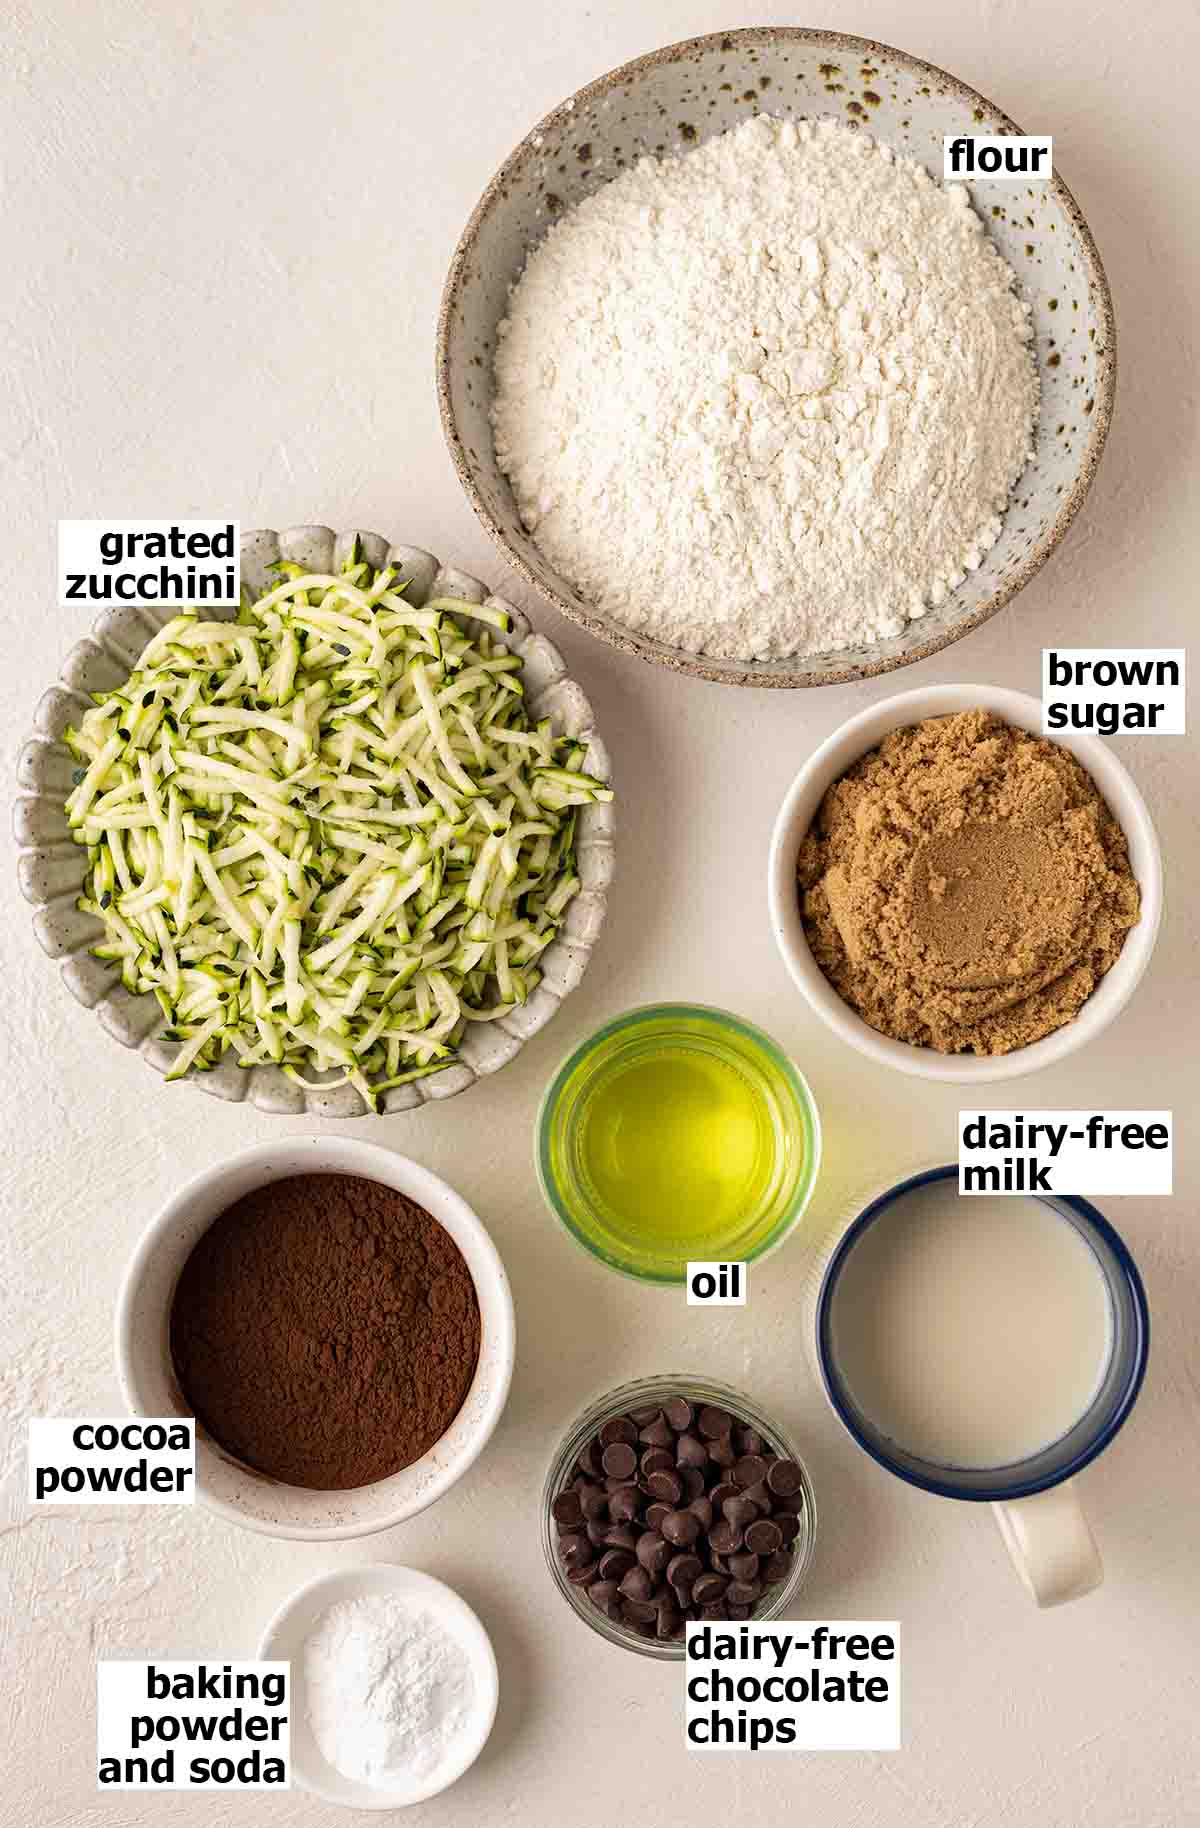 Flat-lay of ingredients for muffins.